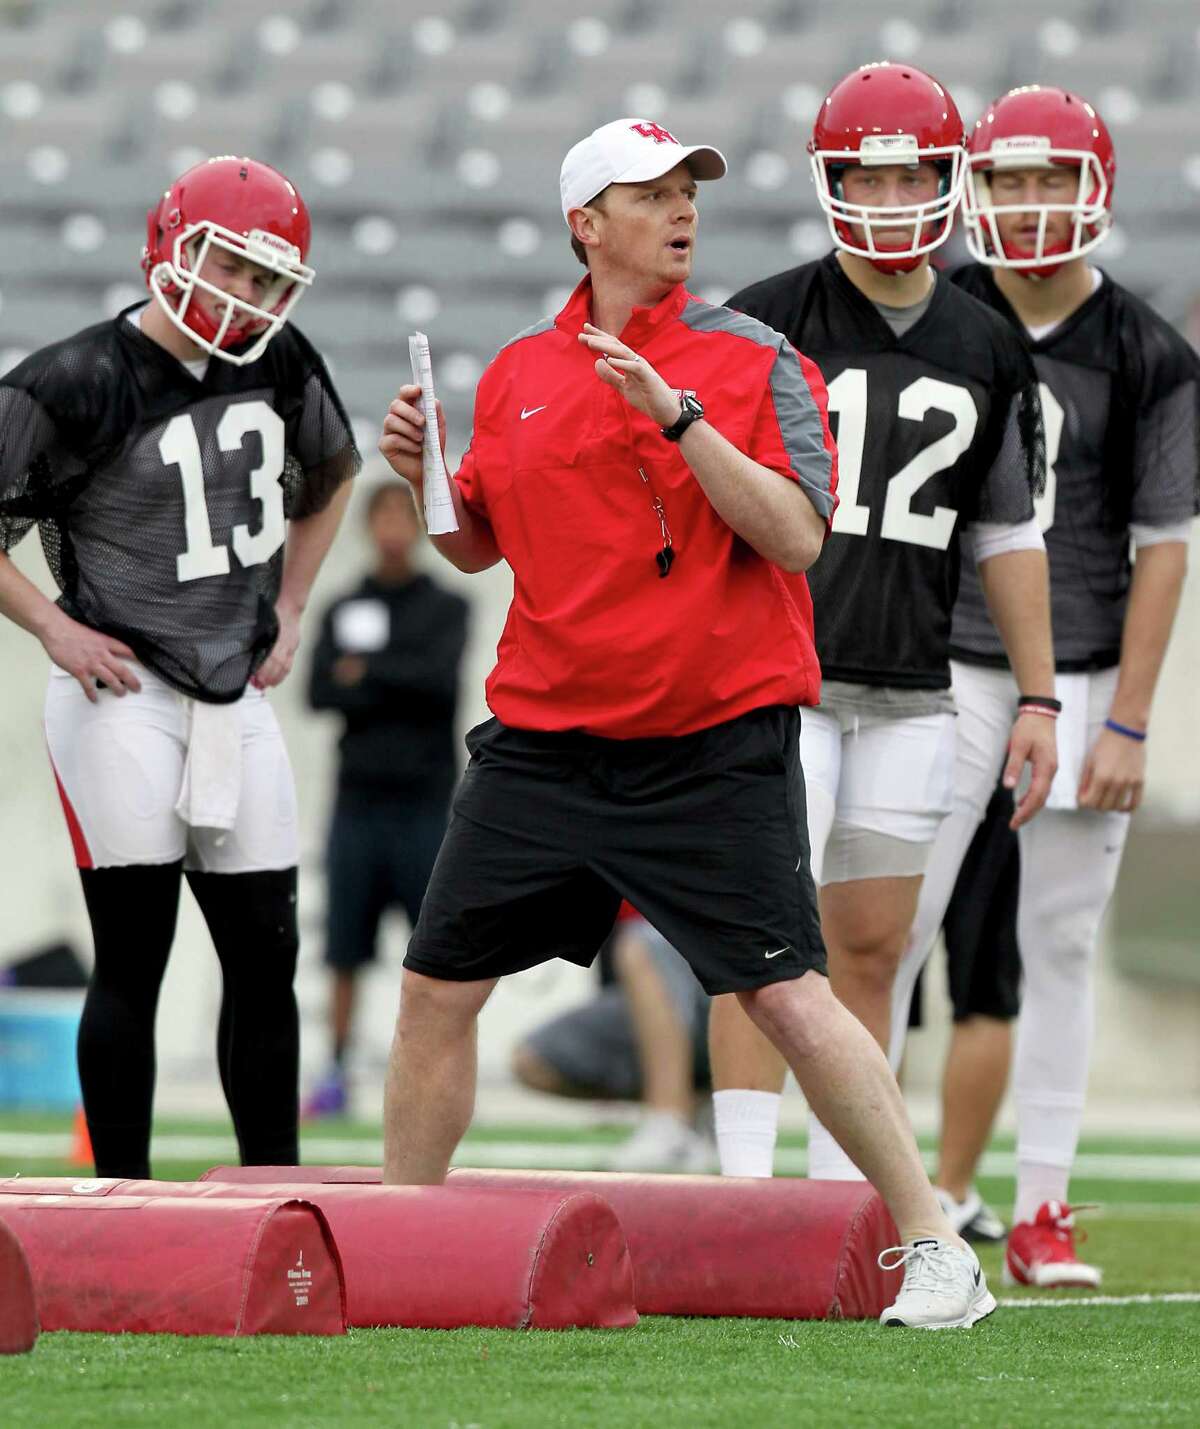 In this March 10, 2015 photo, Houston quarterbacks listen to quarterback coach Major Applewhite demonstrate a foot drill during spring NCAA college football practice in Houston. Applewhite was hired to replace Tom Herman as coach at Houston on Friday, Dec. 9, 2016. (Thomas B. Shea/Houston Chronicle via AP)